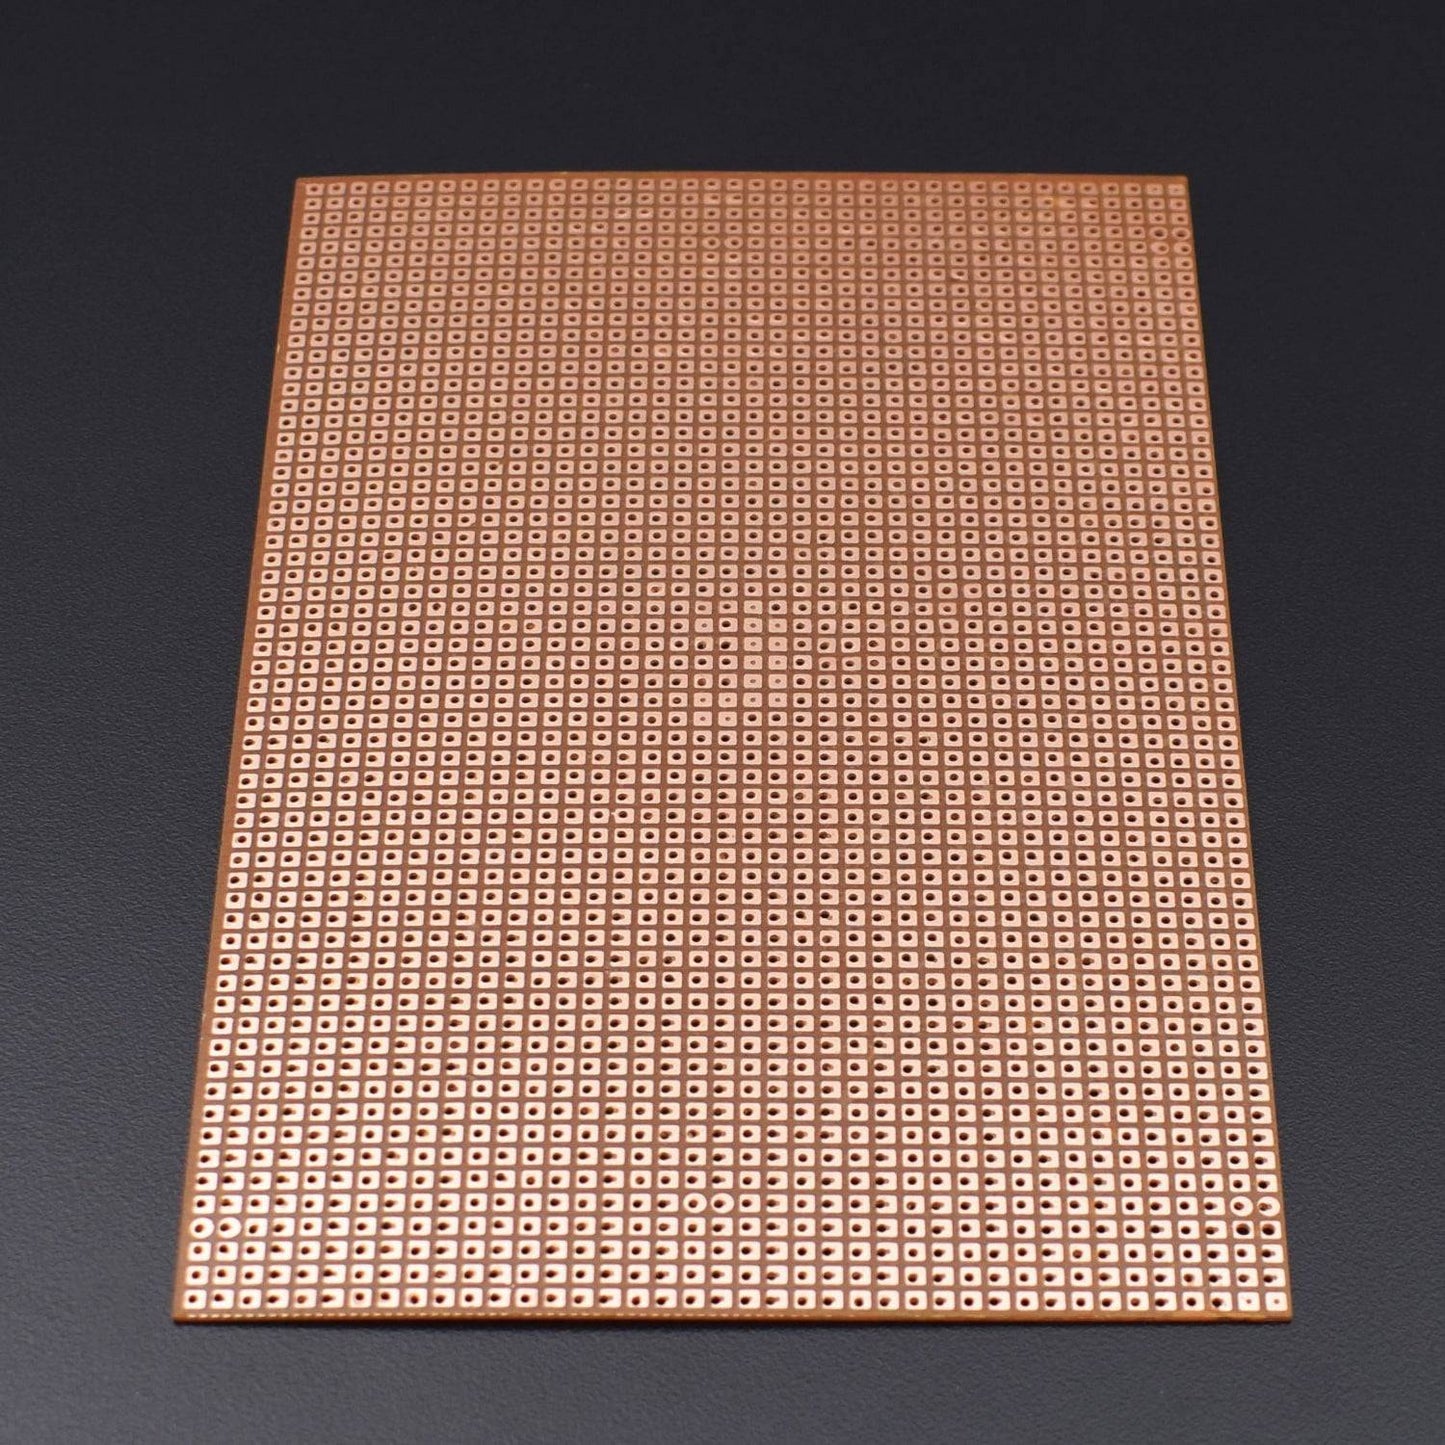 10 x 7 CM PCB Printed Circuit Board for Electronic Circuit - PB002 - REES52